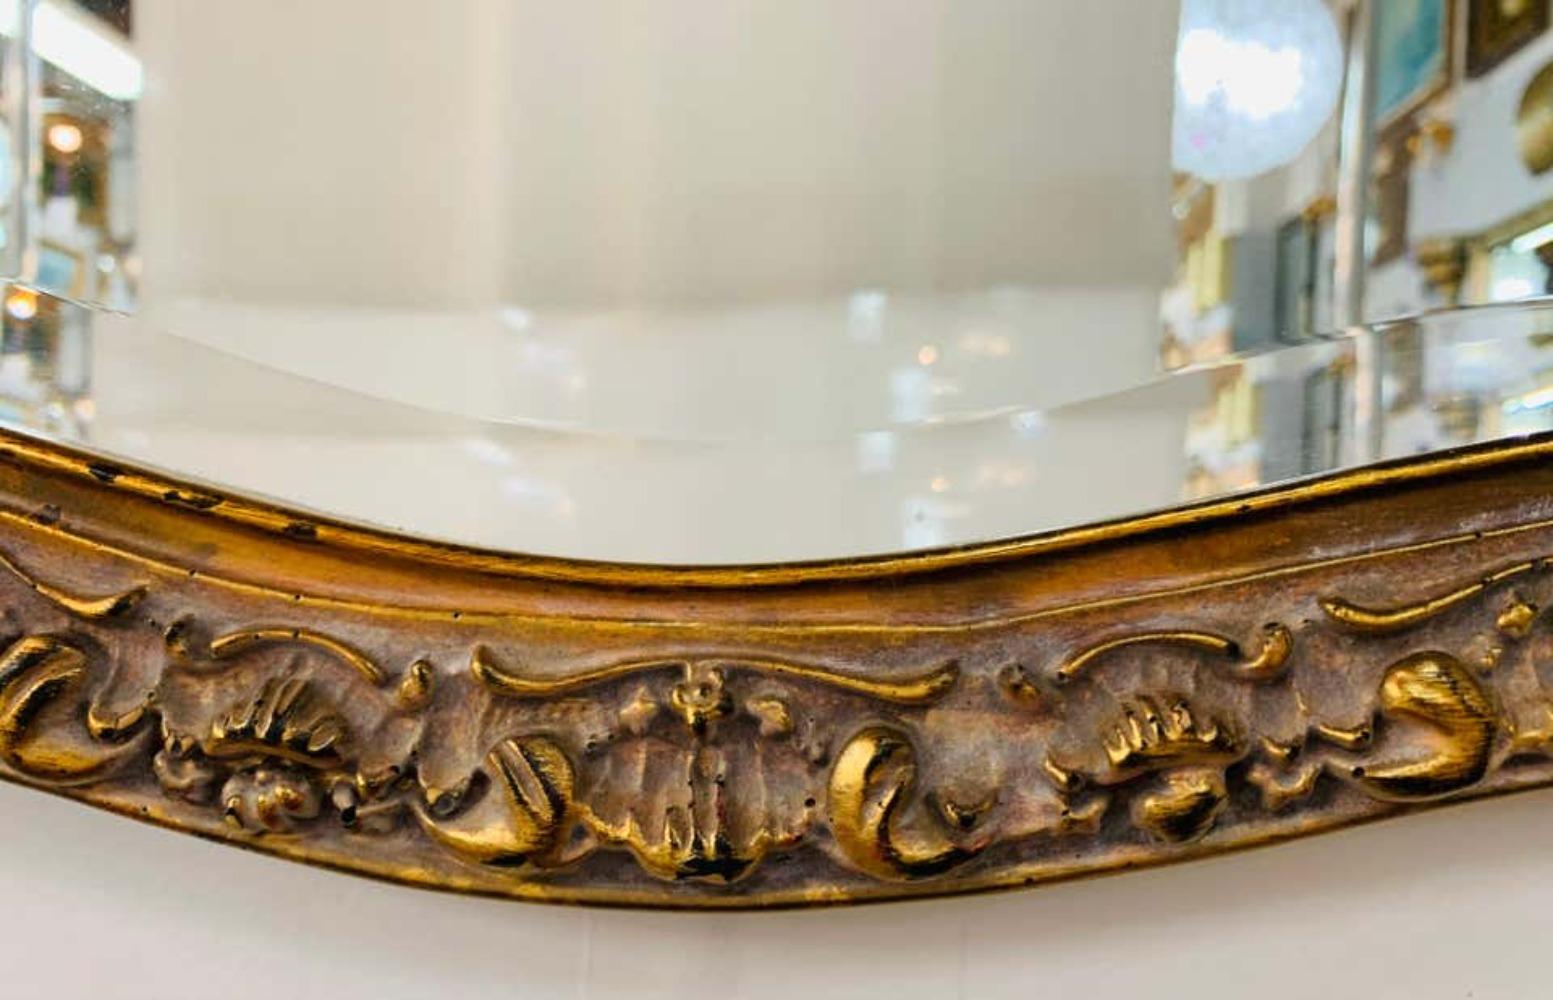 A beautiful French Baroque style mirror made of quality resin. The mirror is finely carved with amazing details and features a charming bow / ribbon with flowers and a beveled edge glass mirror. This mirror displays horizontally and can be placed in